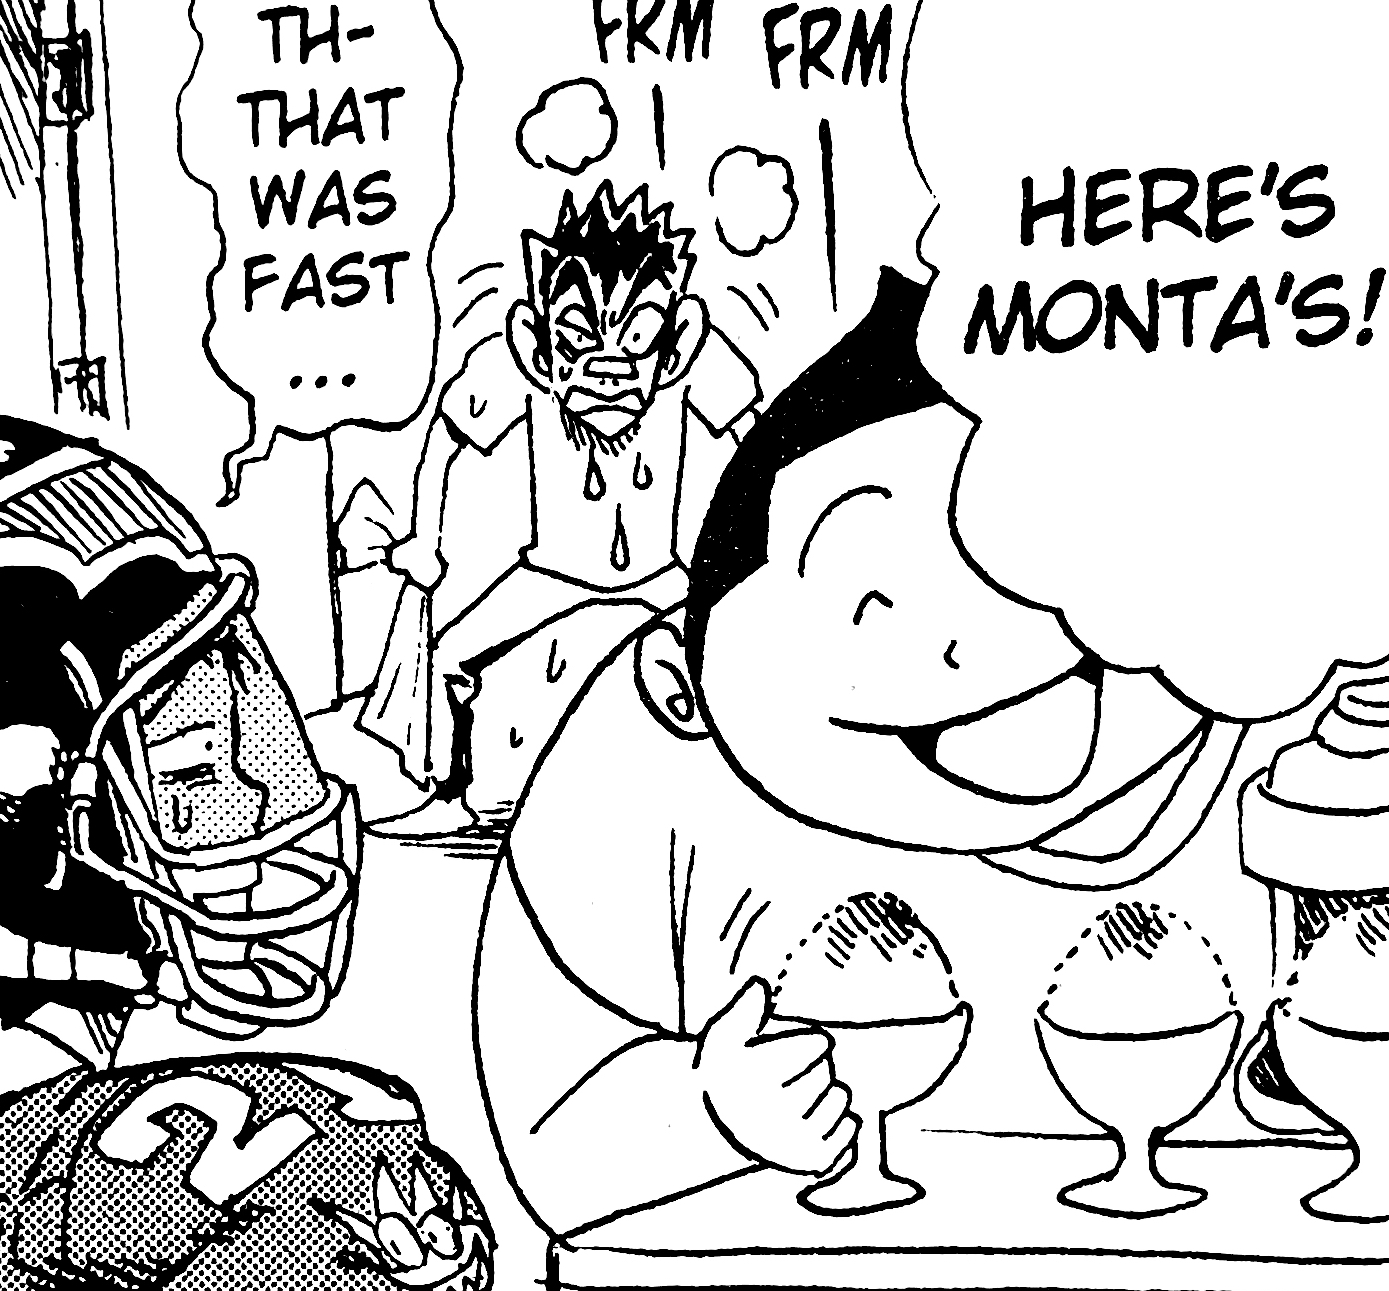 a manga panel of Kurita making kakigoori as Sena watches. Once Monta trudges back up the stairs covered in sweat, Kurita announces 'Here's Monta's!' with a smile.